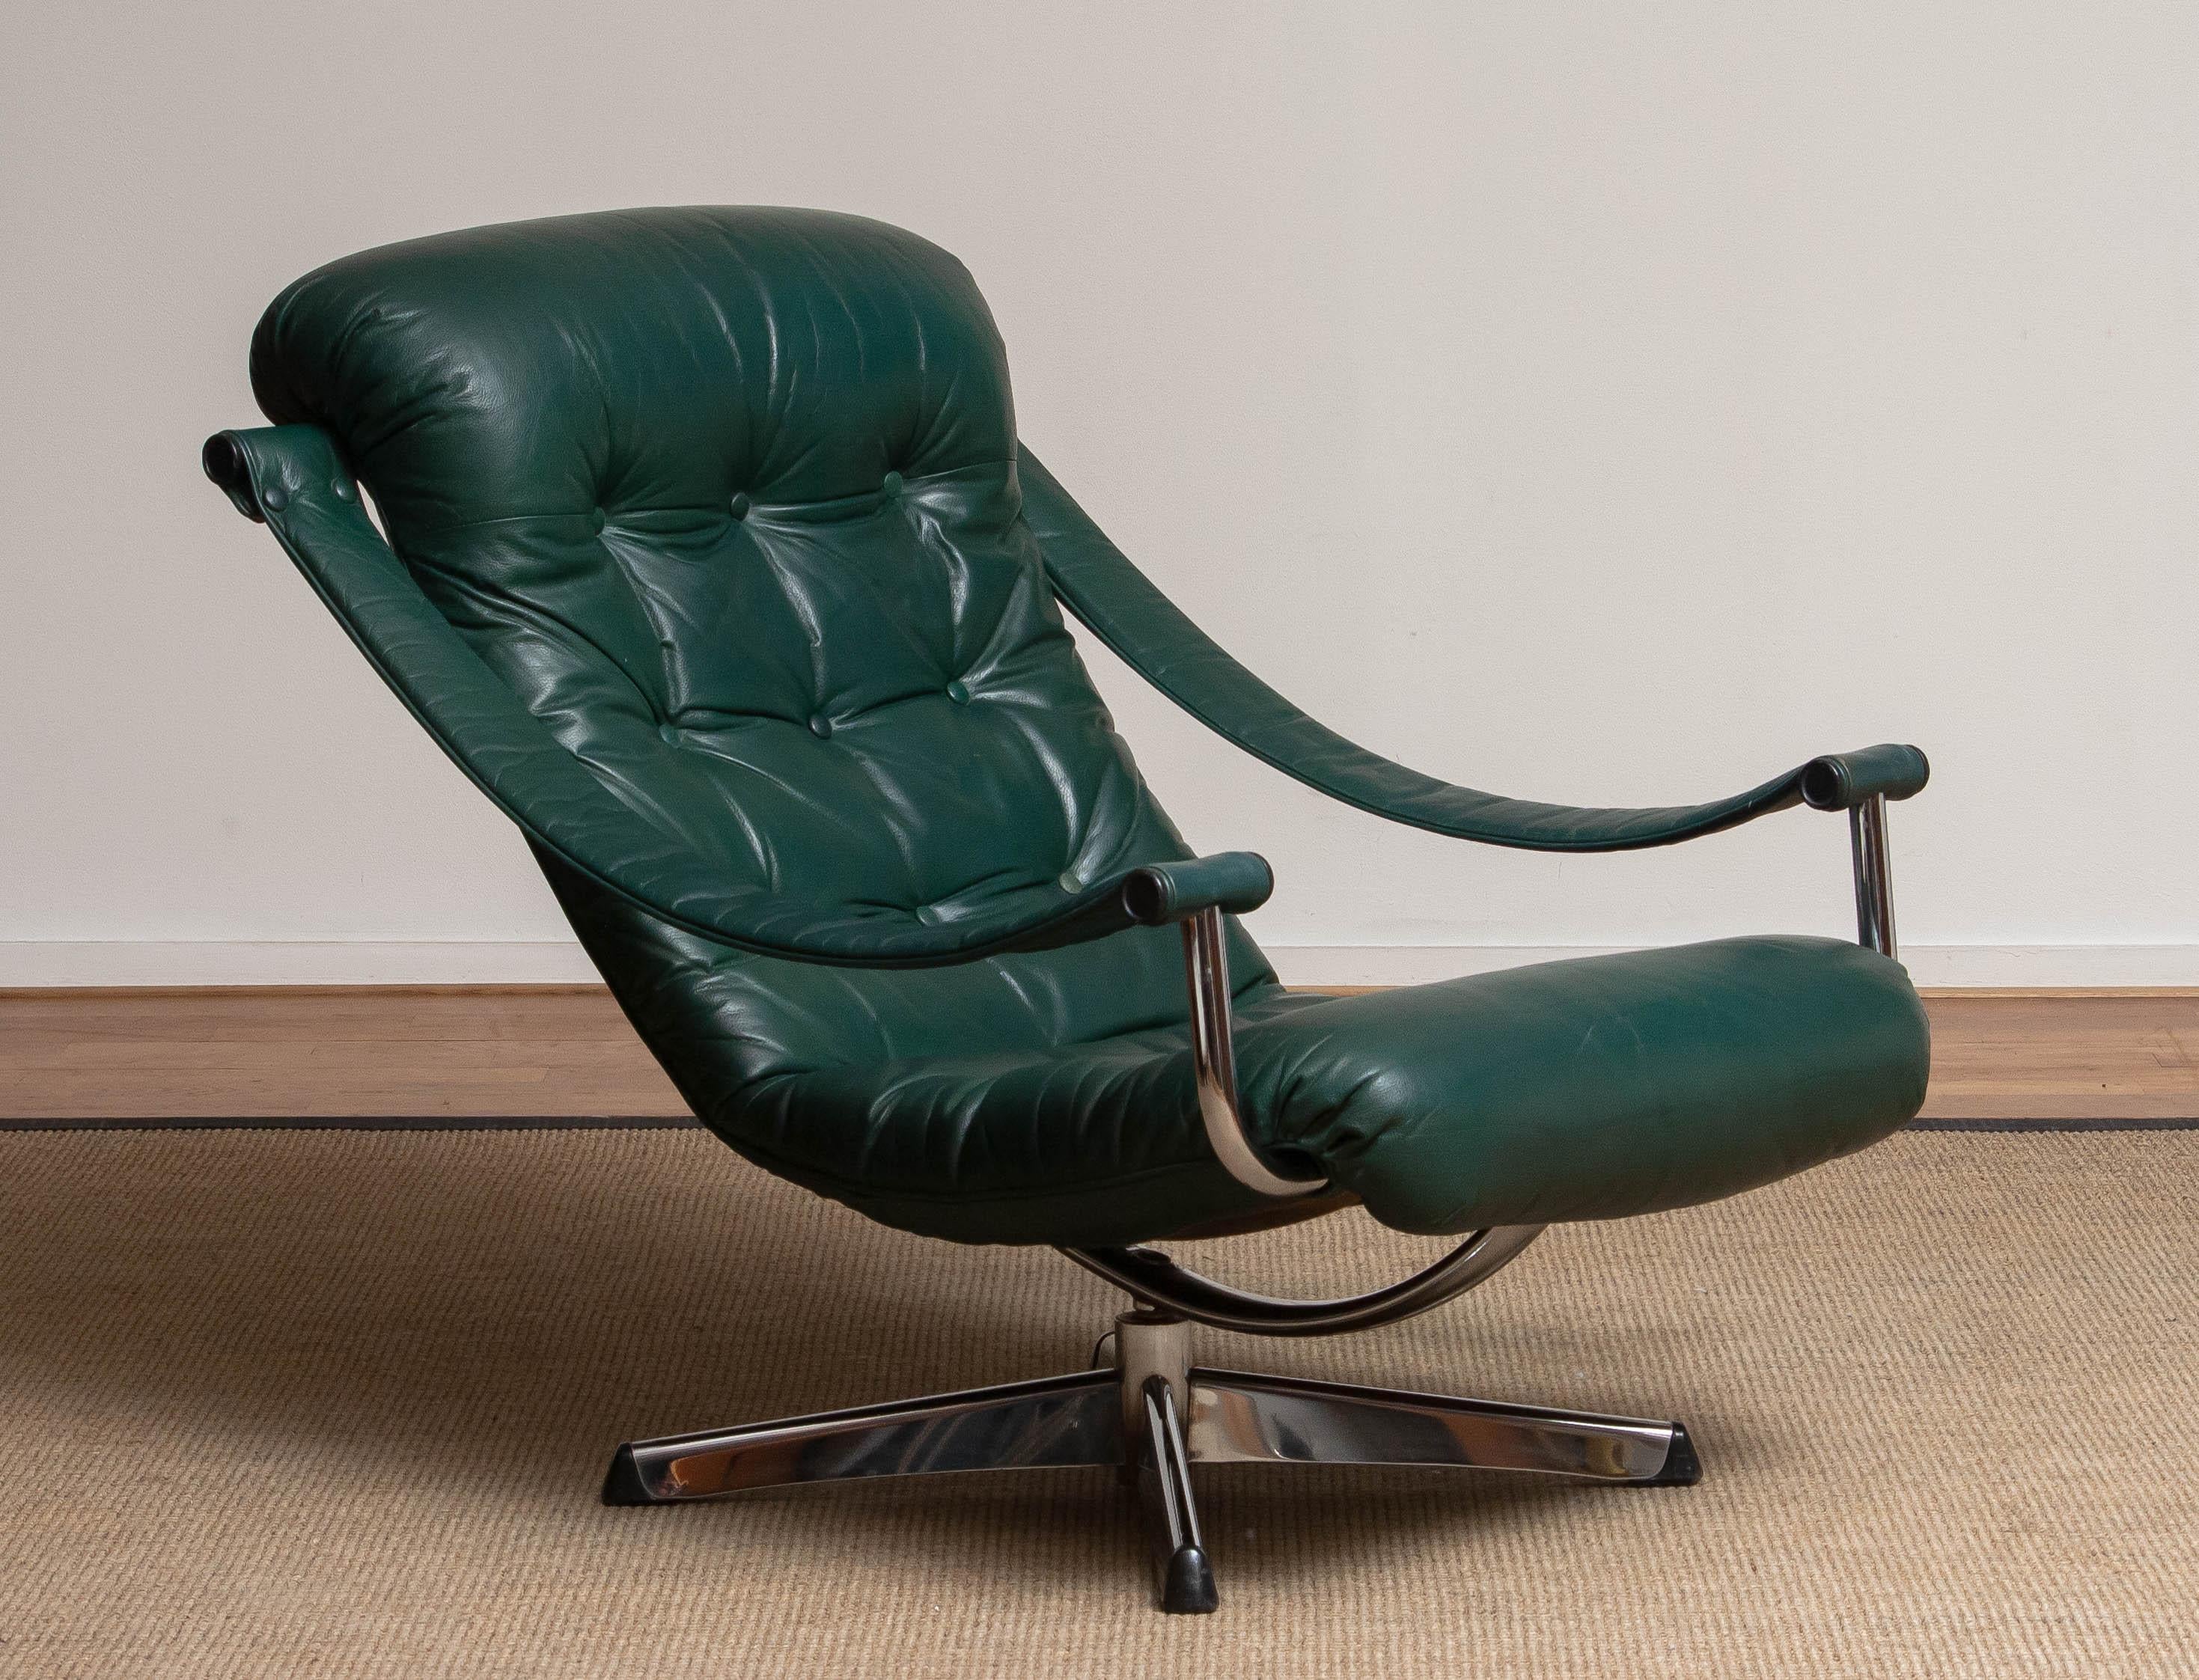 Beautiful modern designed 'Oxford Green' leather swivel chair by Göte Mobler Nassjö in Sweden.
Tufted seat and backrest in allover good condition. 
Beside the comfort this swivel chair is an absolute eye catcher in your interior.
Please note that